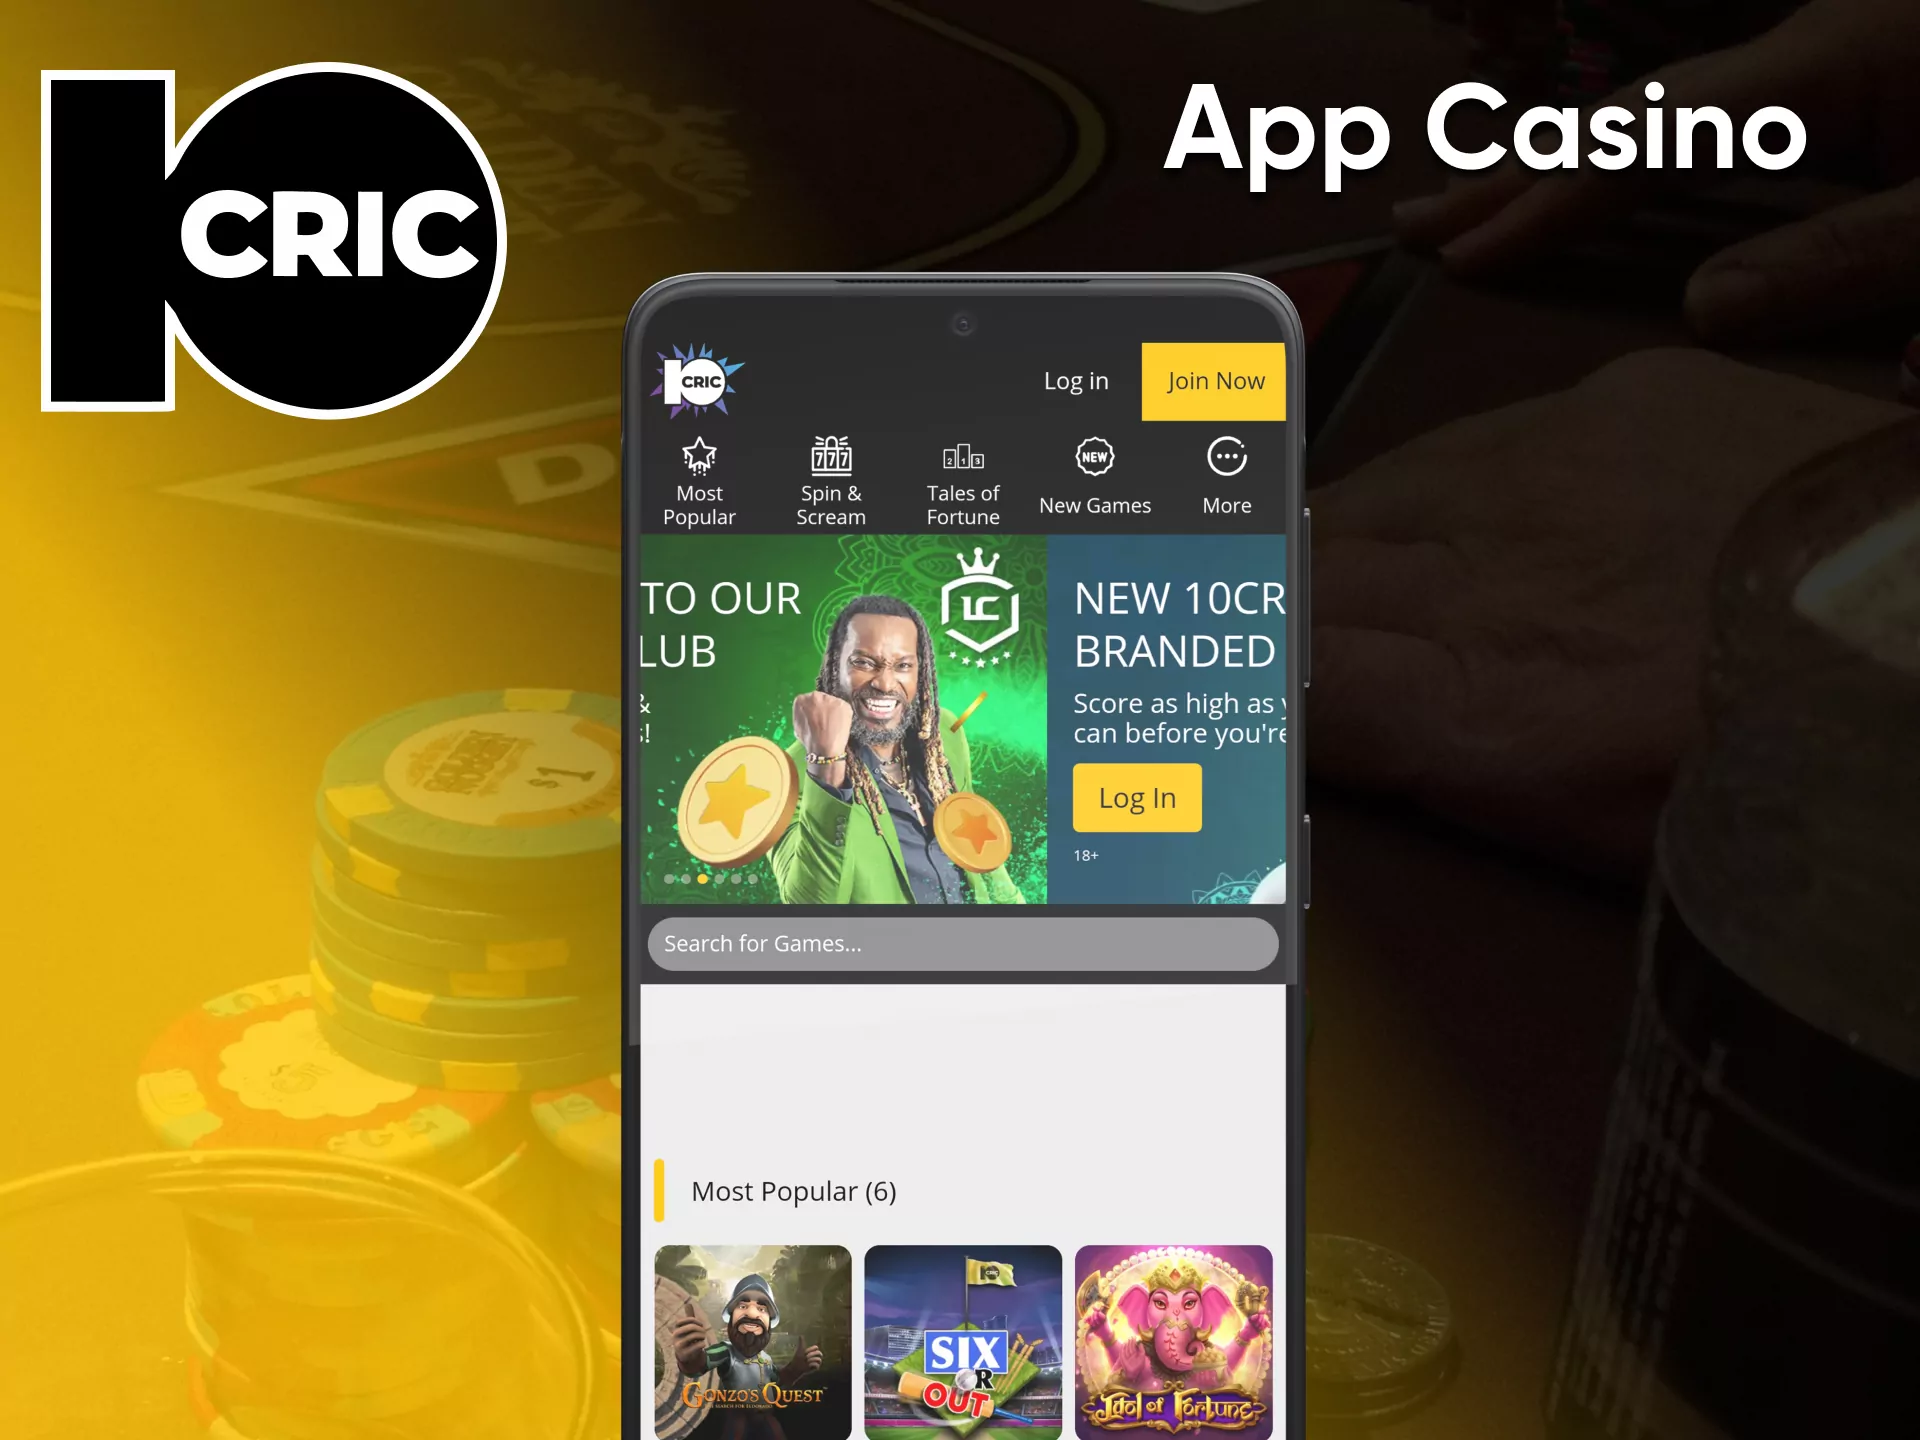 For casino games, use the service from 10cric.